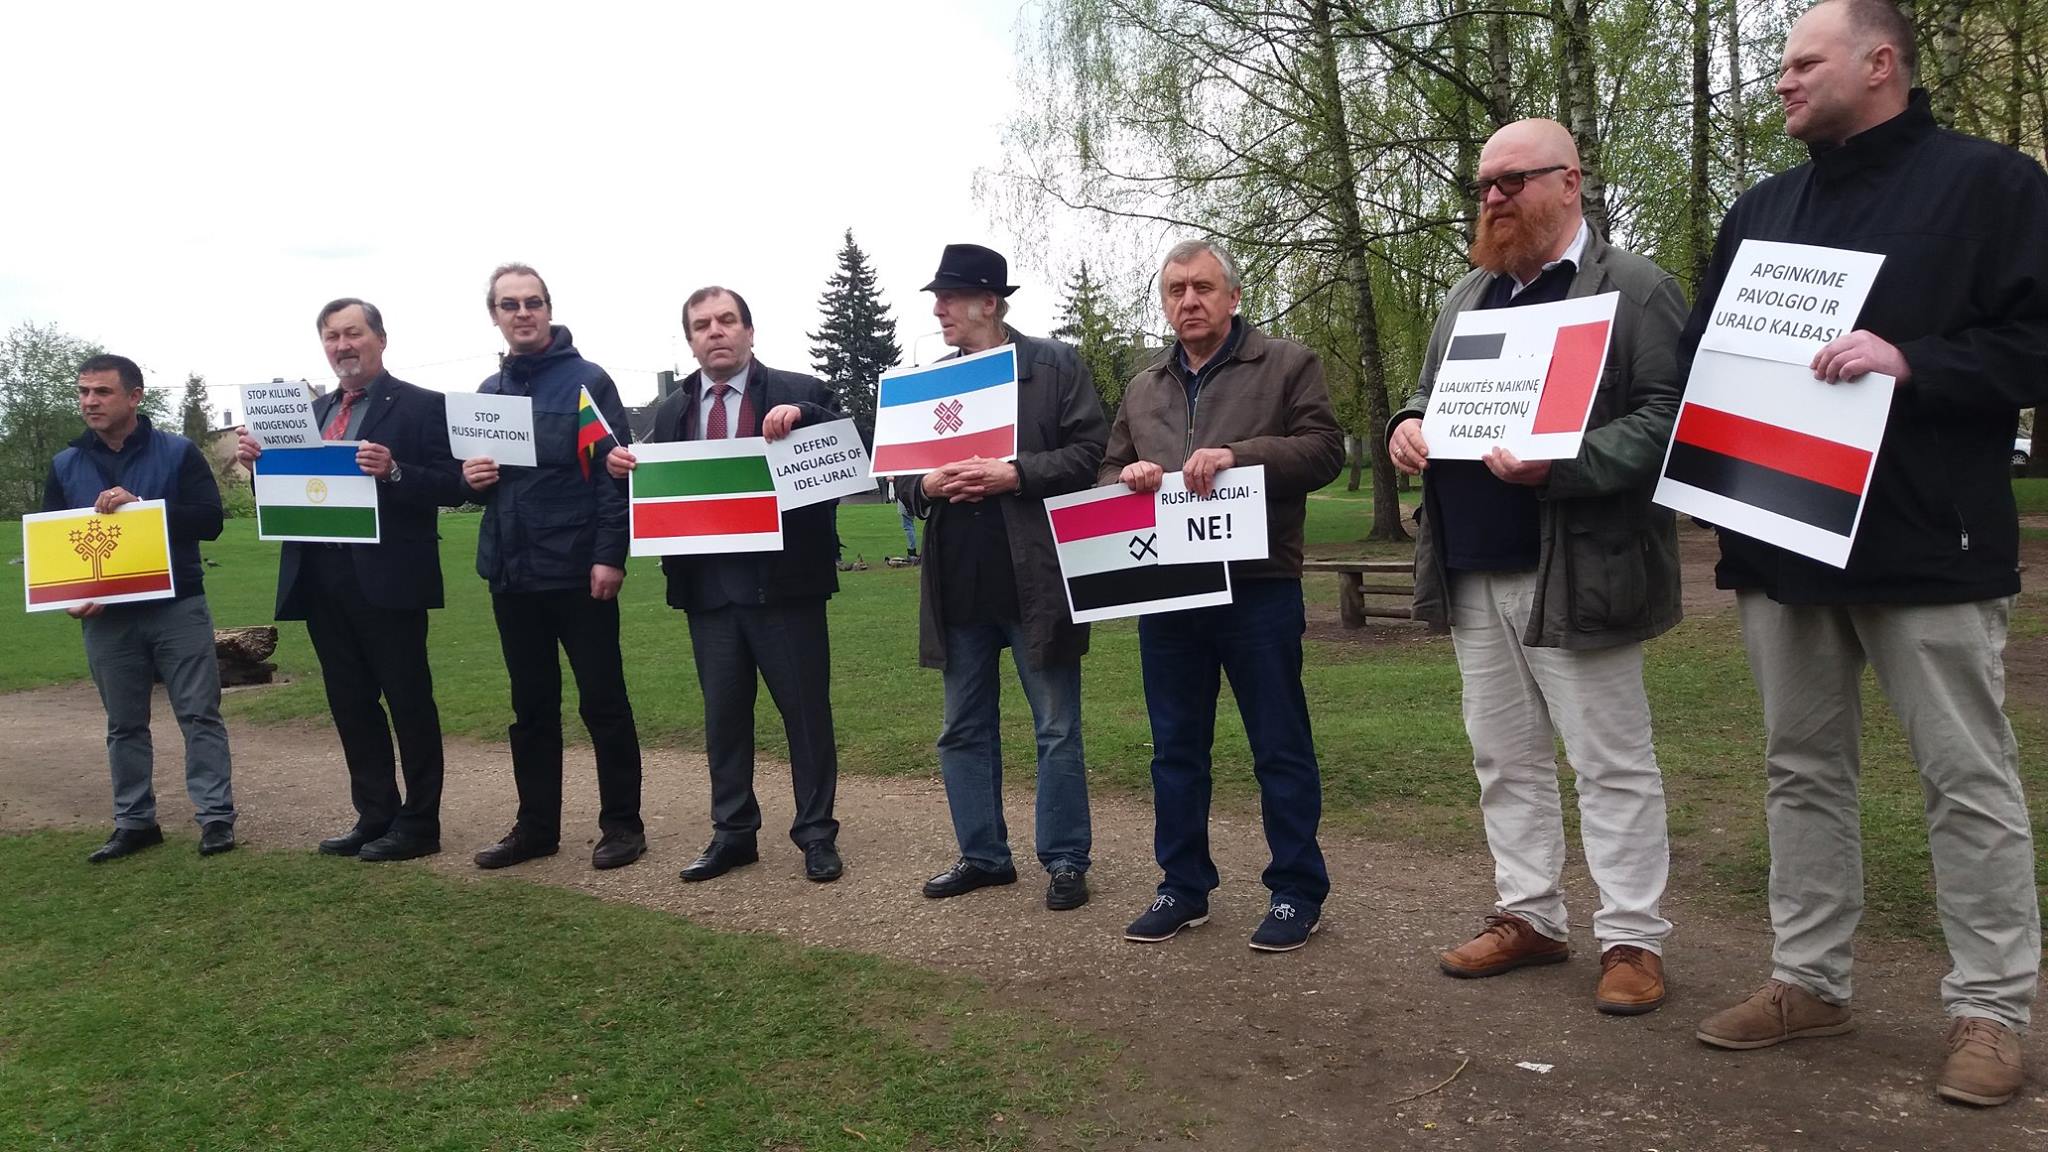 Representatives of indigenous peoples of the Volga region protested Russian Embassies around the world